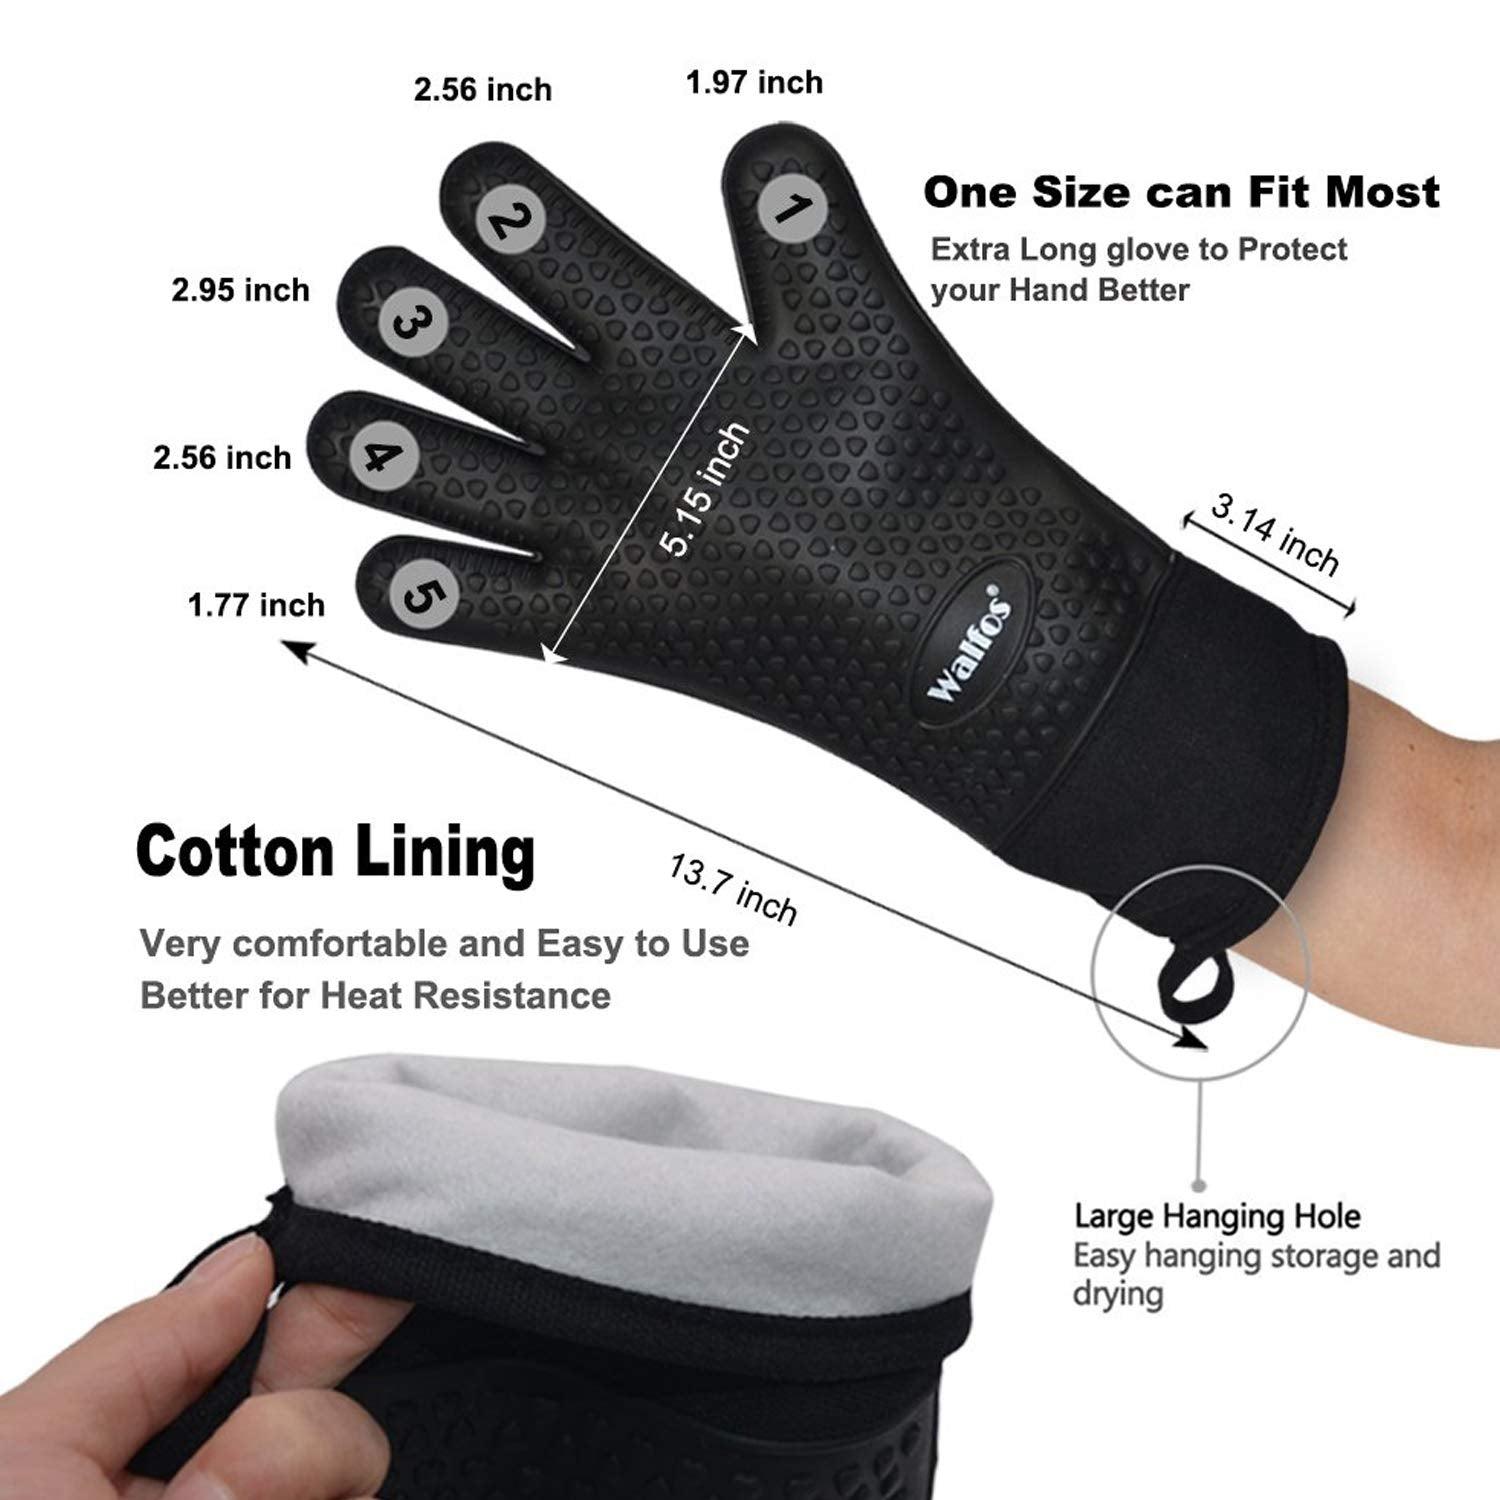 Walfos Silicone BBQ Gloves - Heat Resistant Grilling Gloves, Premium Non-Slip Kitchen Silicone Oven Mitt With Protective Cotton Layer Inside, Waterproof, Great for Grilling, Kitchen and Cooking, Black - CookCave